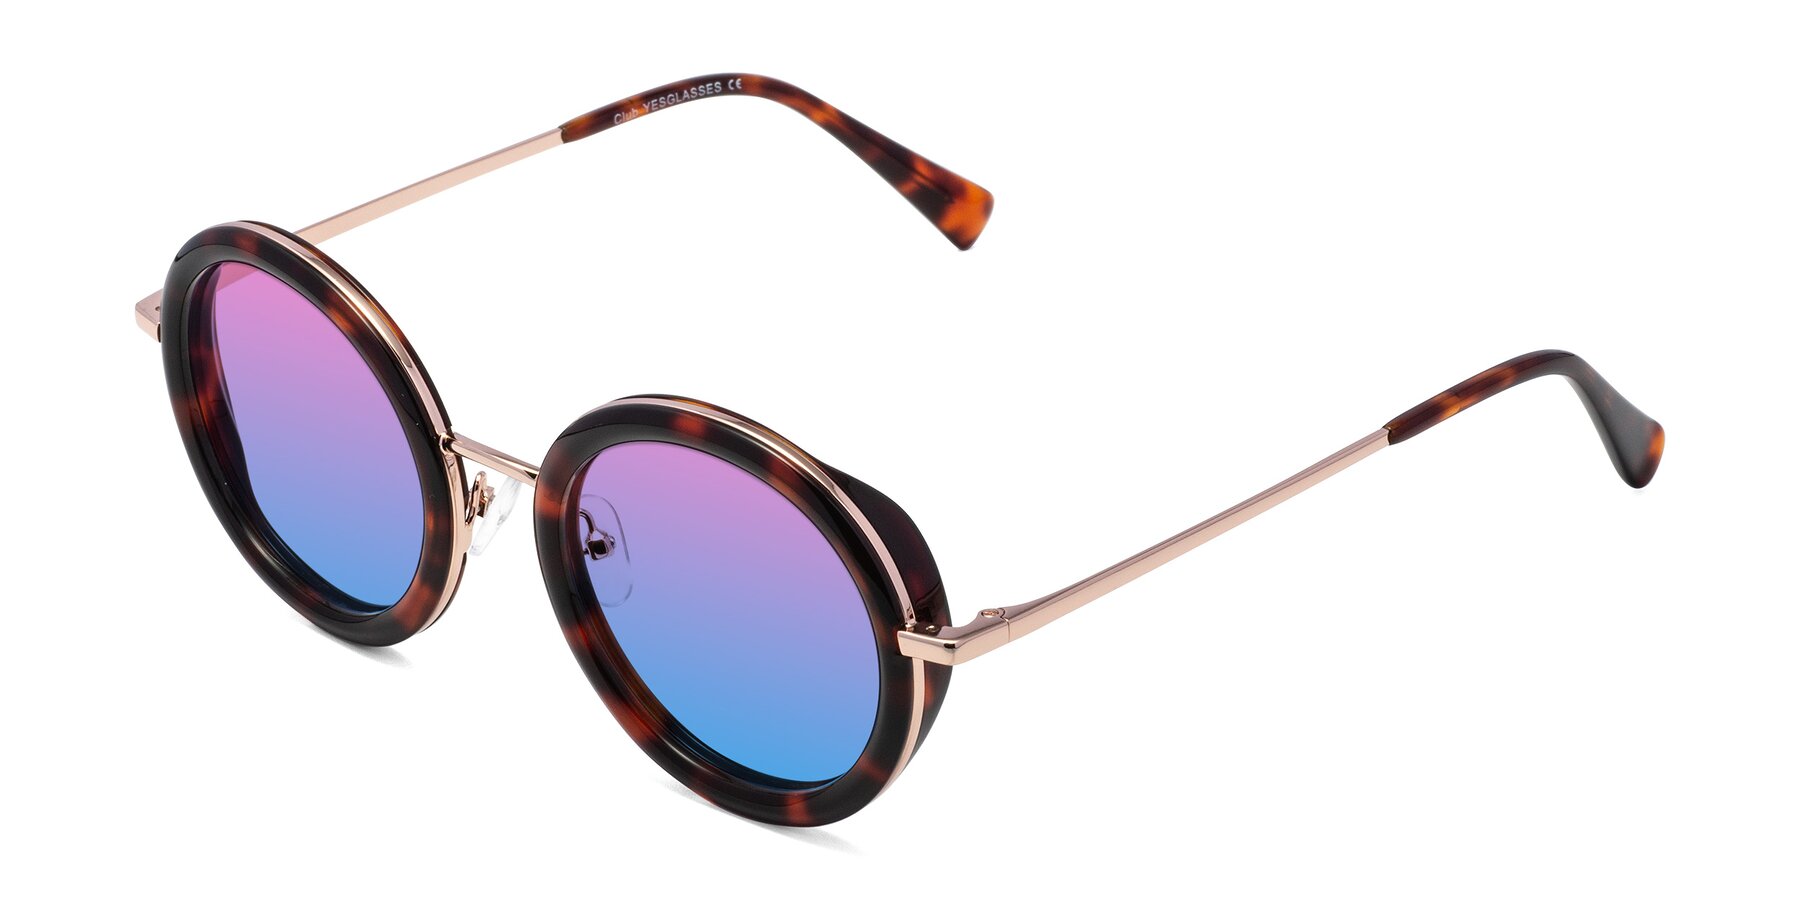 Angle of Club in Tortoise-Rose Gold with Pink / Blue Gradient Lenses